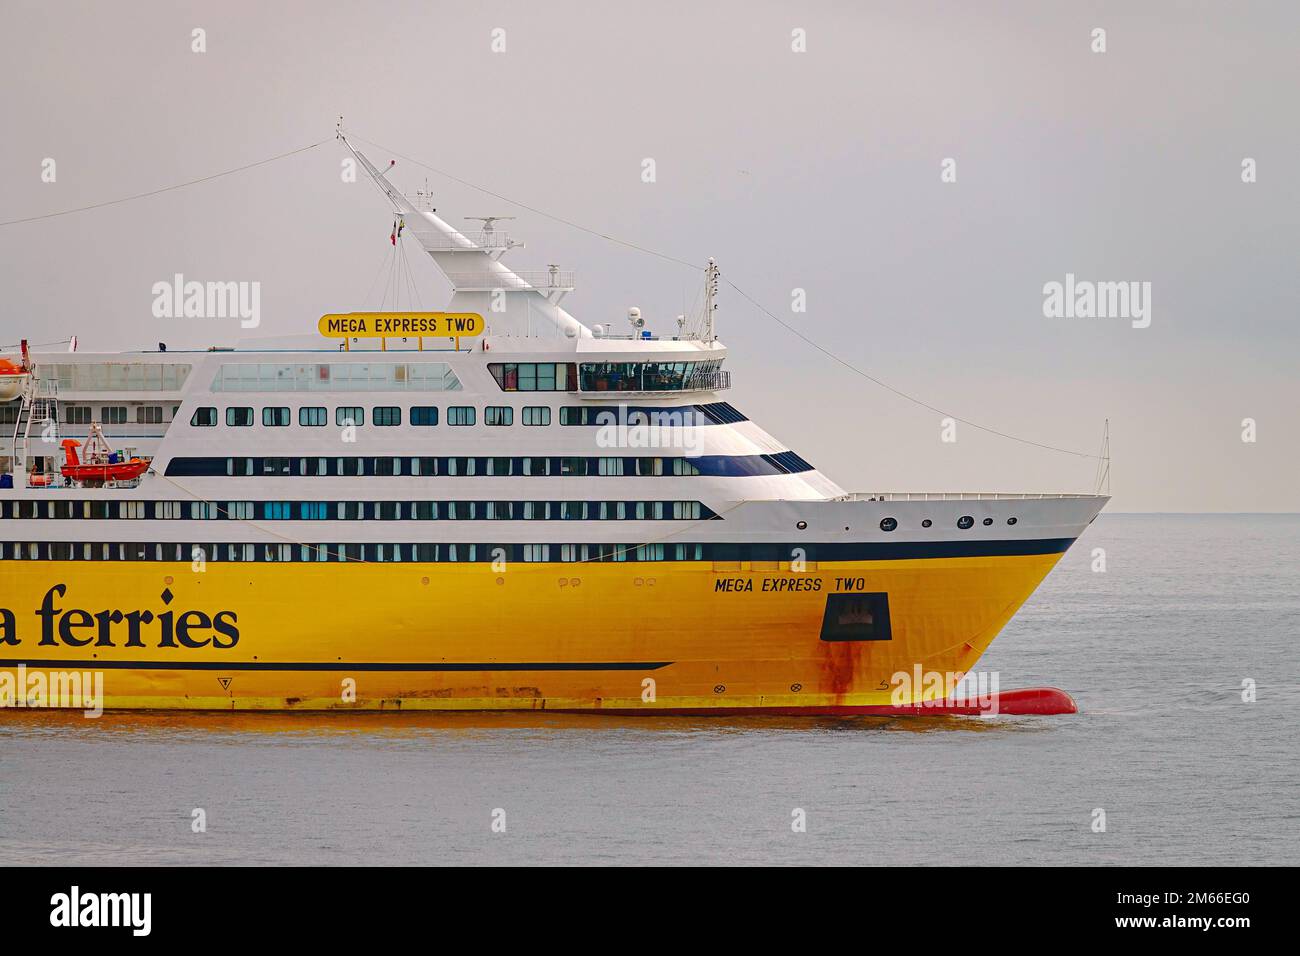 View of a yellow ferryboat Corsica Sardinia Ferries in the Port of Nice harbor. Nice, France - December 2022 Stock Photo